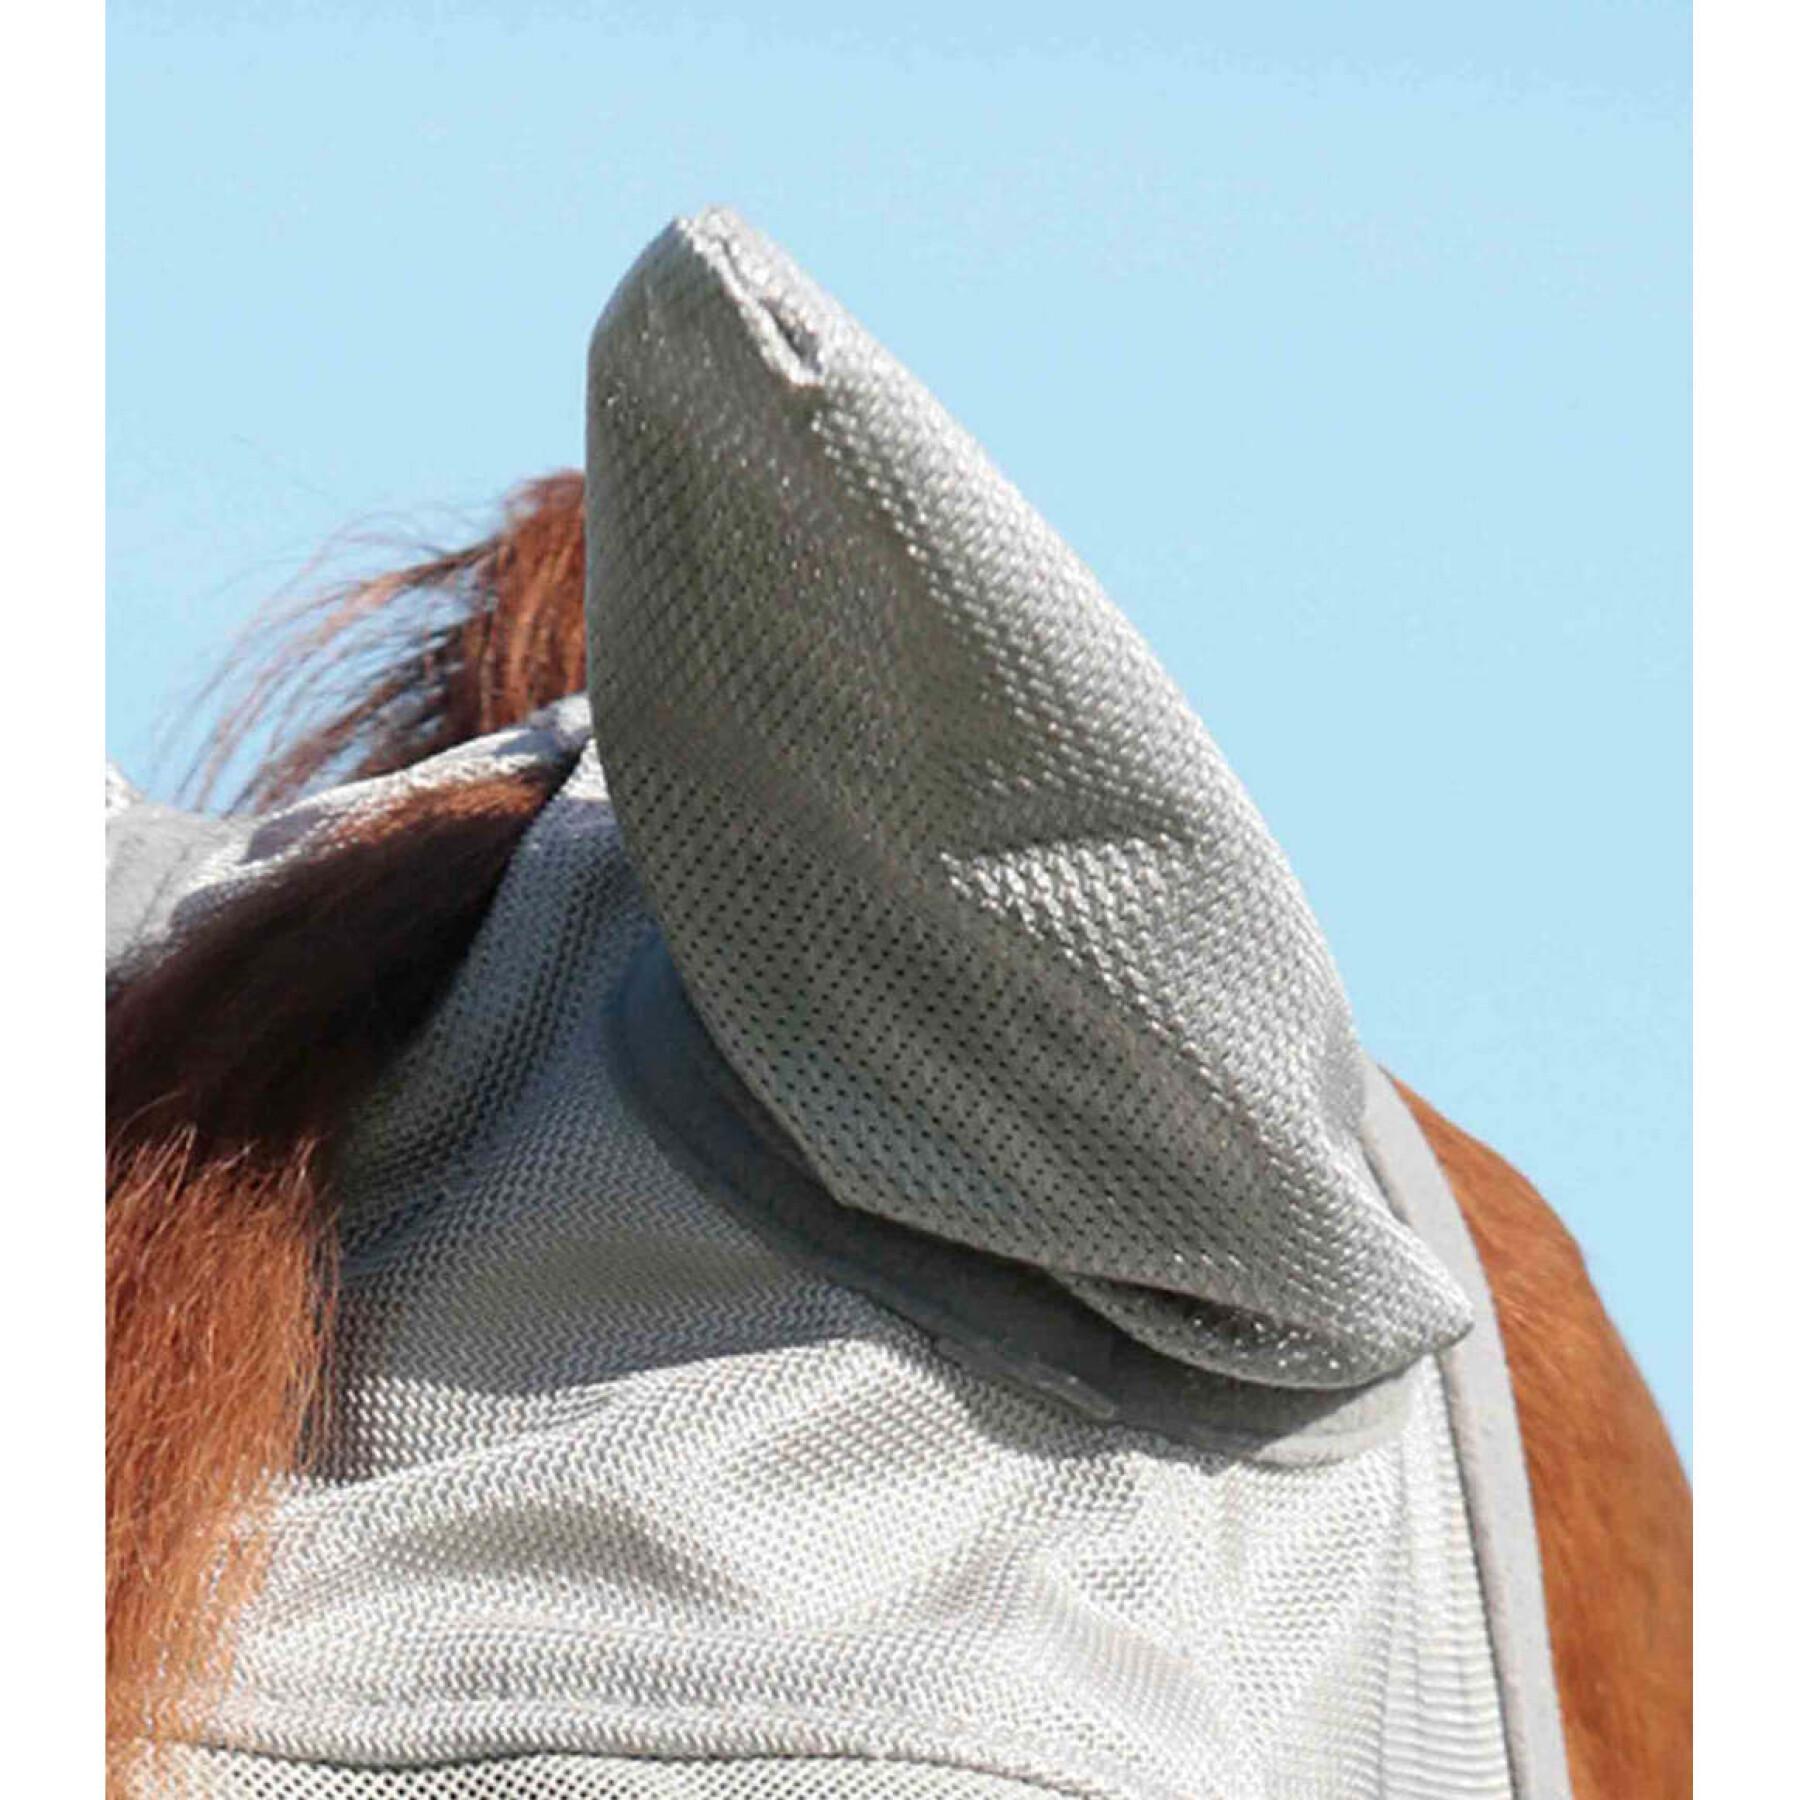 Anti-fly mask for horses Premier Equine Buster Standard Plus